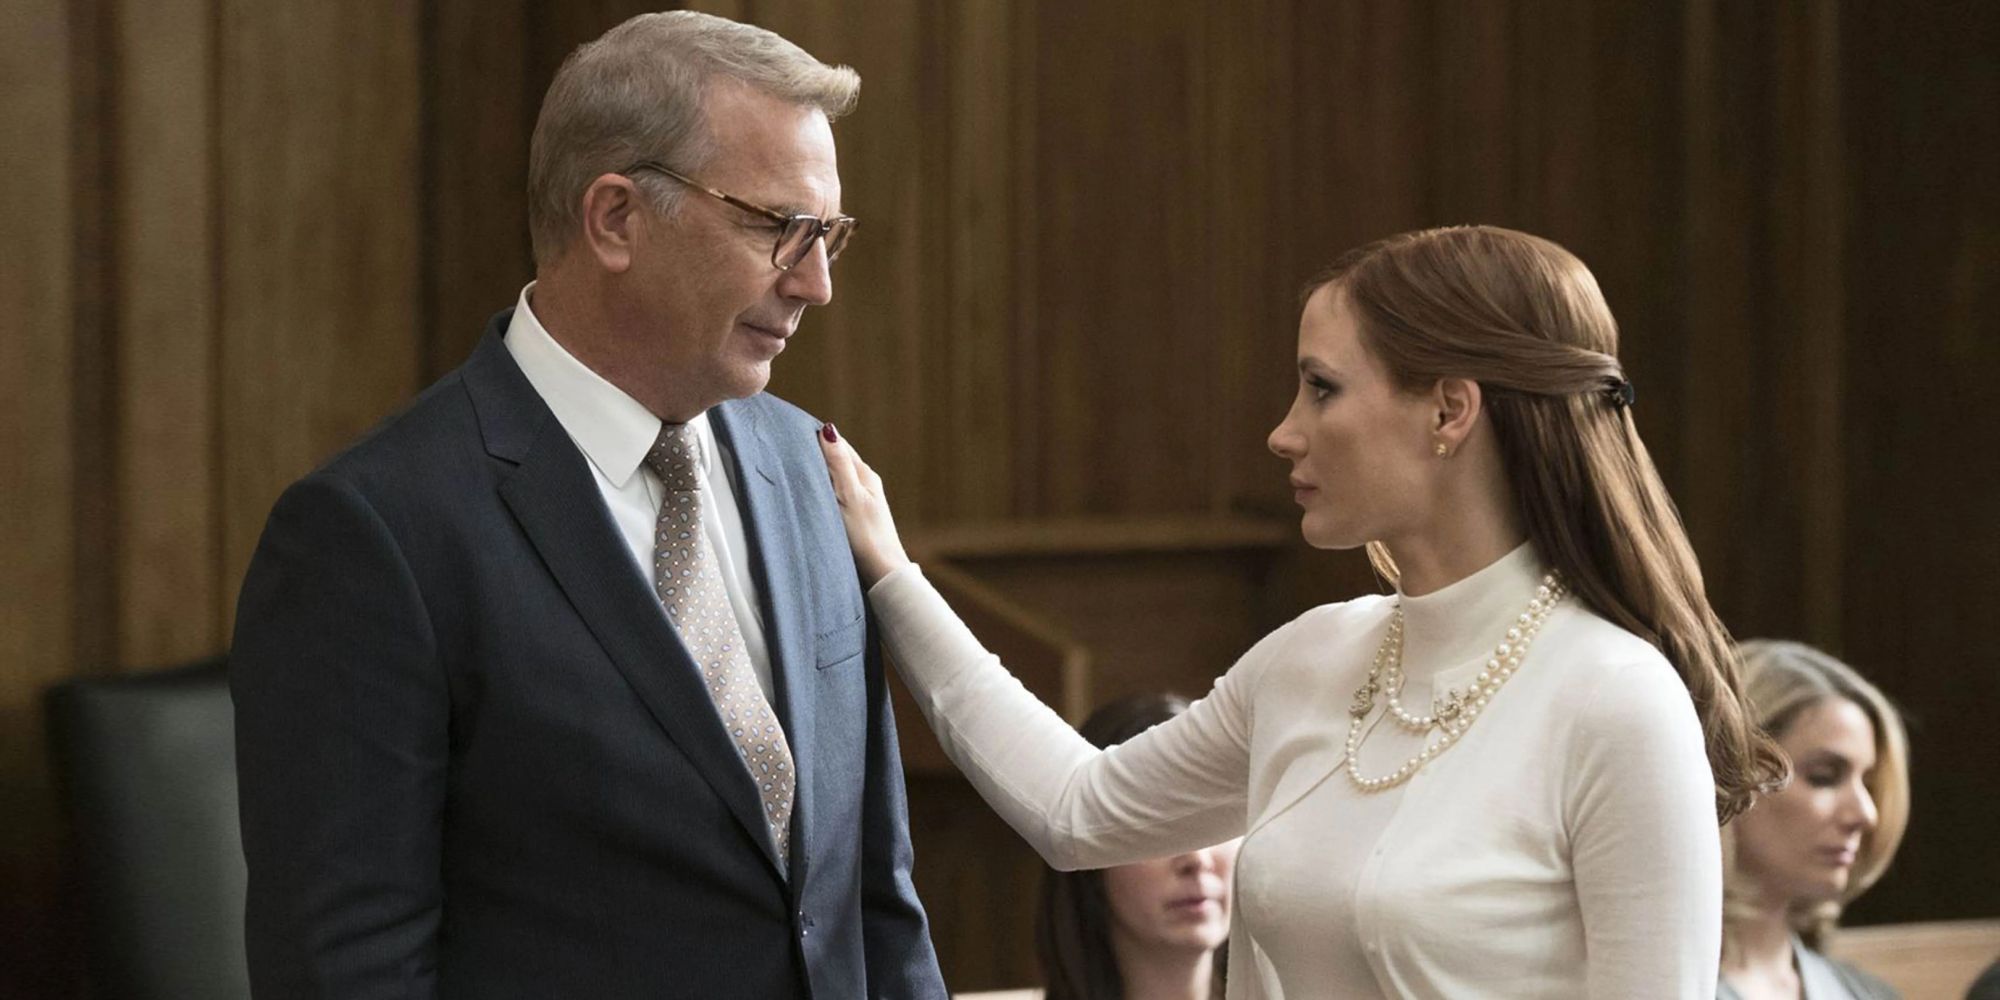 Kevin Costner and Jessica Chastain as Larry and Molly Bloom in Molly's game, with Molly touching Larry's shoulder solemenly.